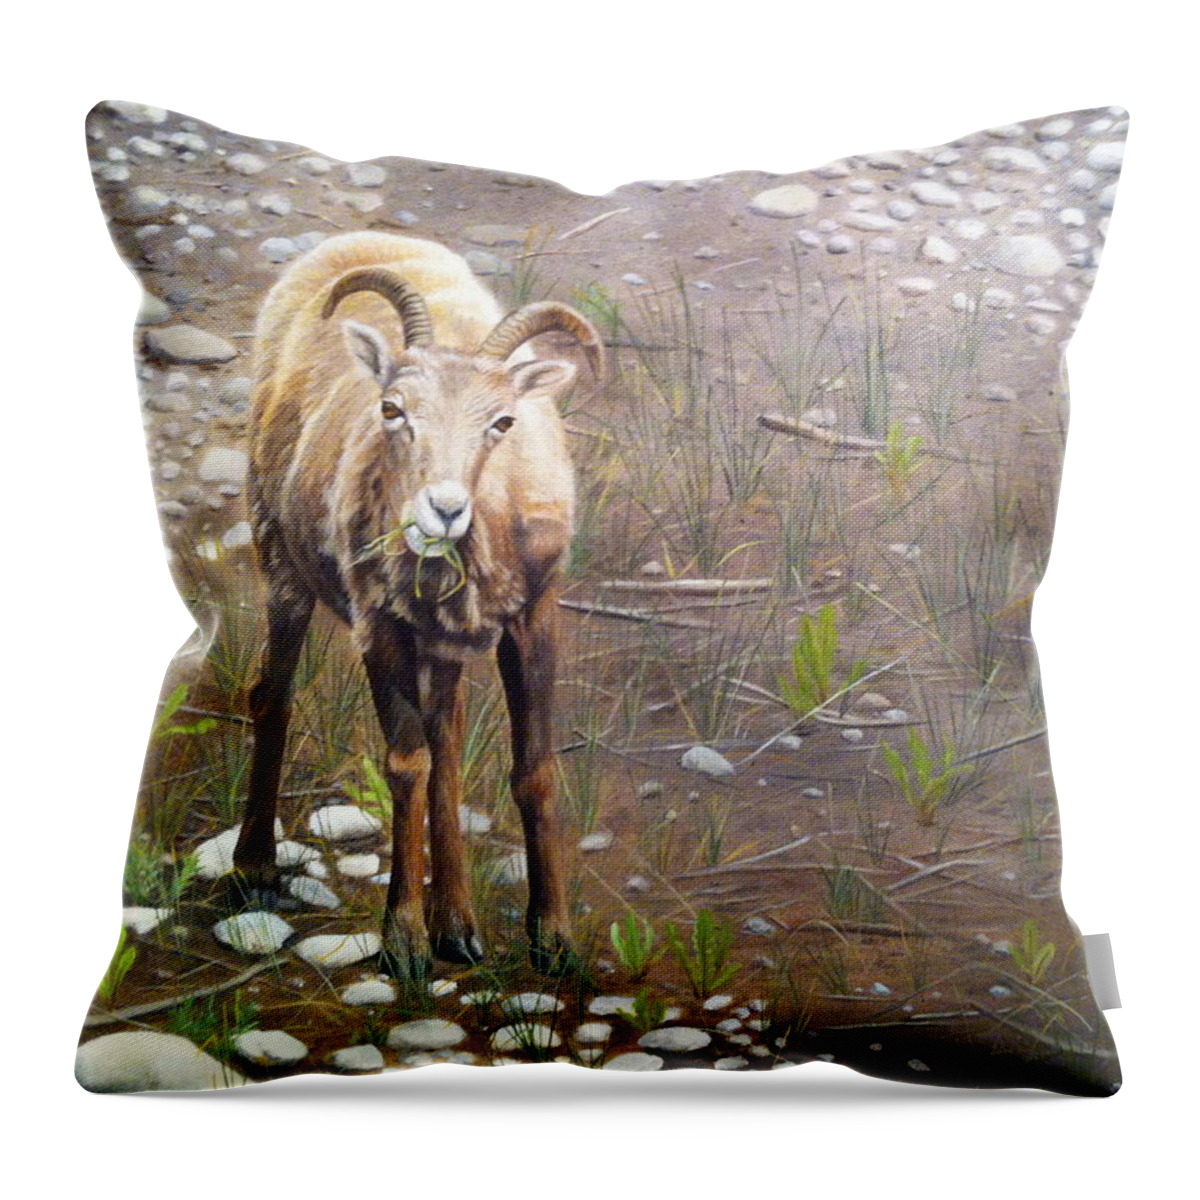 Big Horn Sheep Throw Pillow featuring the painting Tourist Attraction by Tammy Taylor